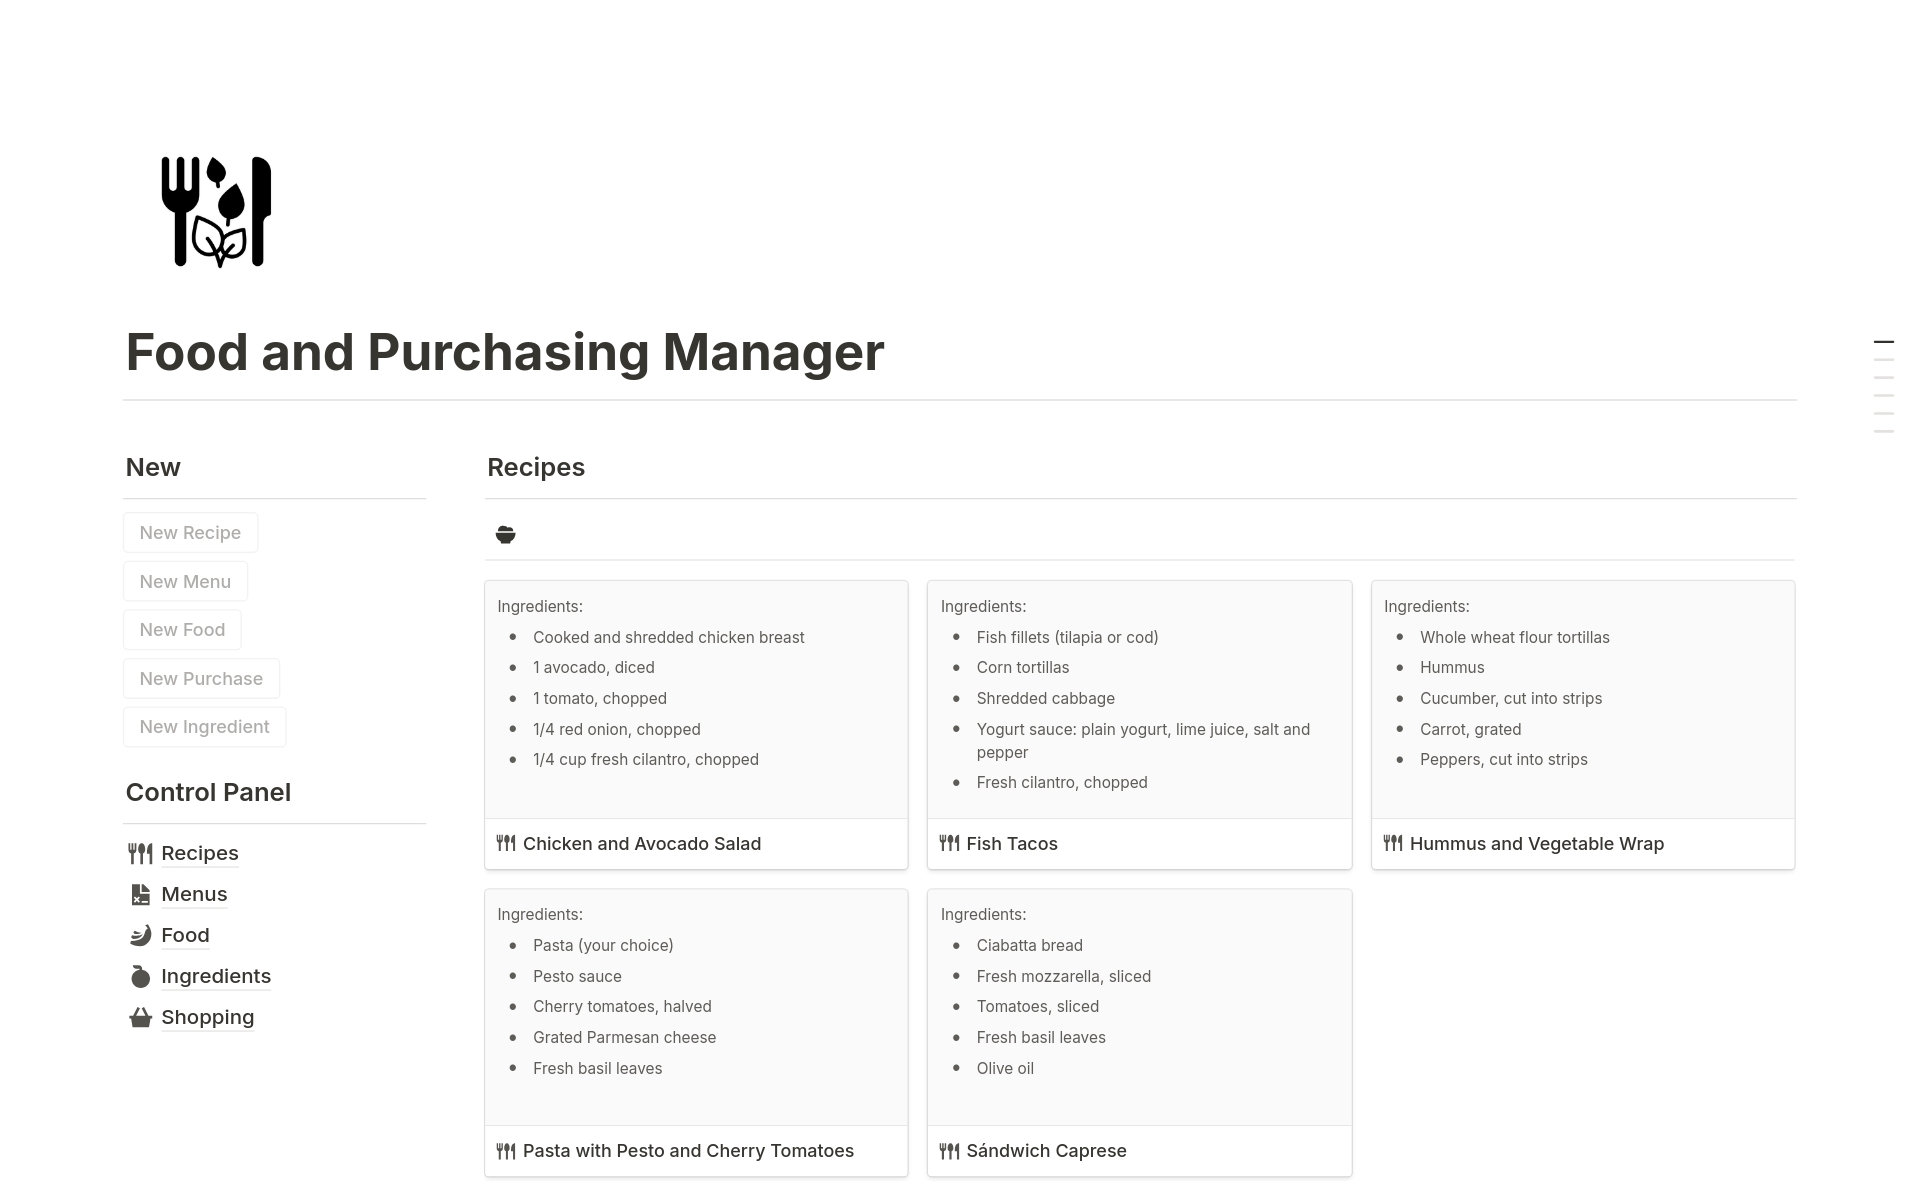 Organize your food and shopping efficiently with our template. Plan menus and manage your shopping list with ease.